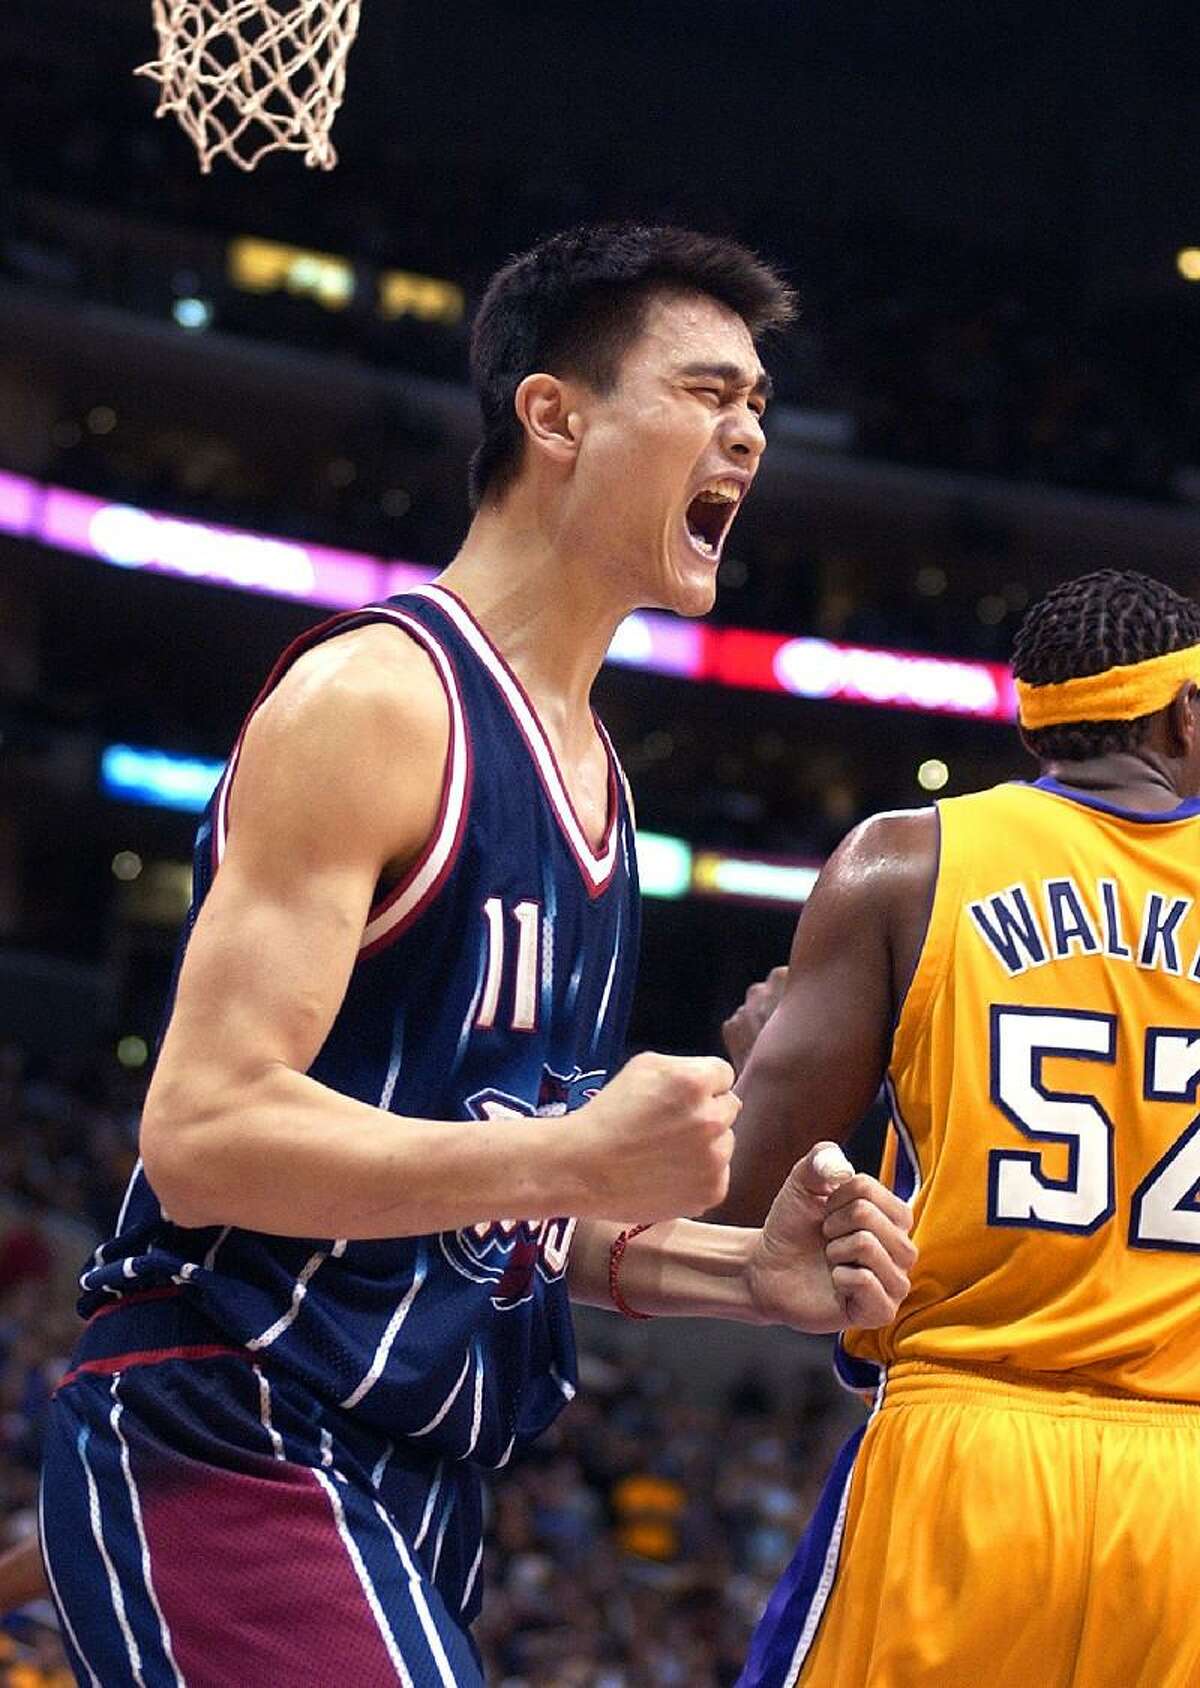 ASSOCIATED PRESS This Nov. 17, 2002 file photo shows Houston Rockets' Yao Ming reacting after scoring against the Los Angeles Lakers in Los Angeles. Yahoo! Sports is reporting that Yao Ming is retiring from basketball. The 7-foot-6 Houston Rockets center, plagued by lower-body injuries in the second half of his career, has informed the league office that his playing career is over, the website reported.